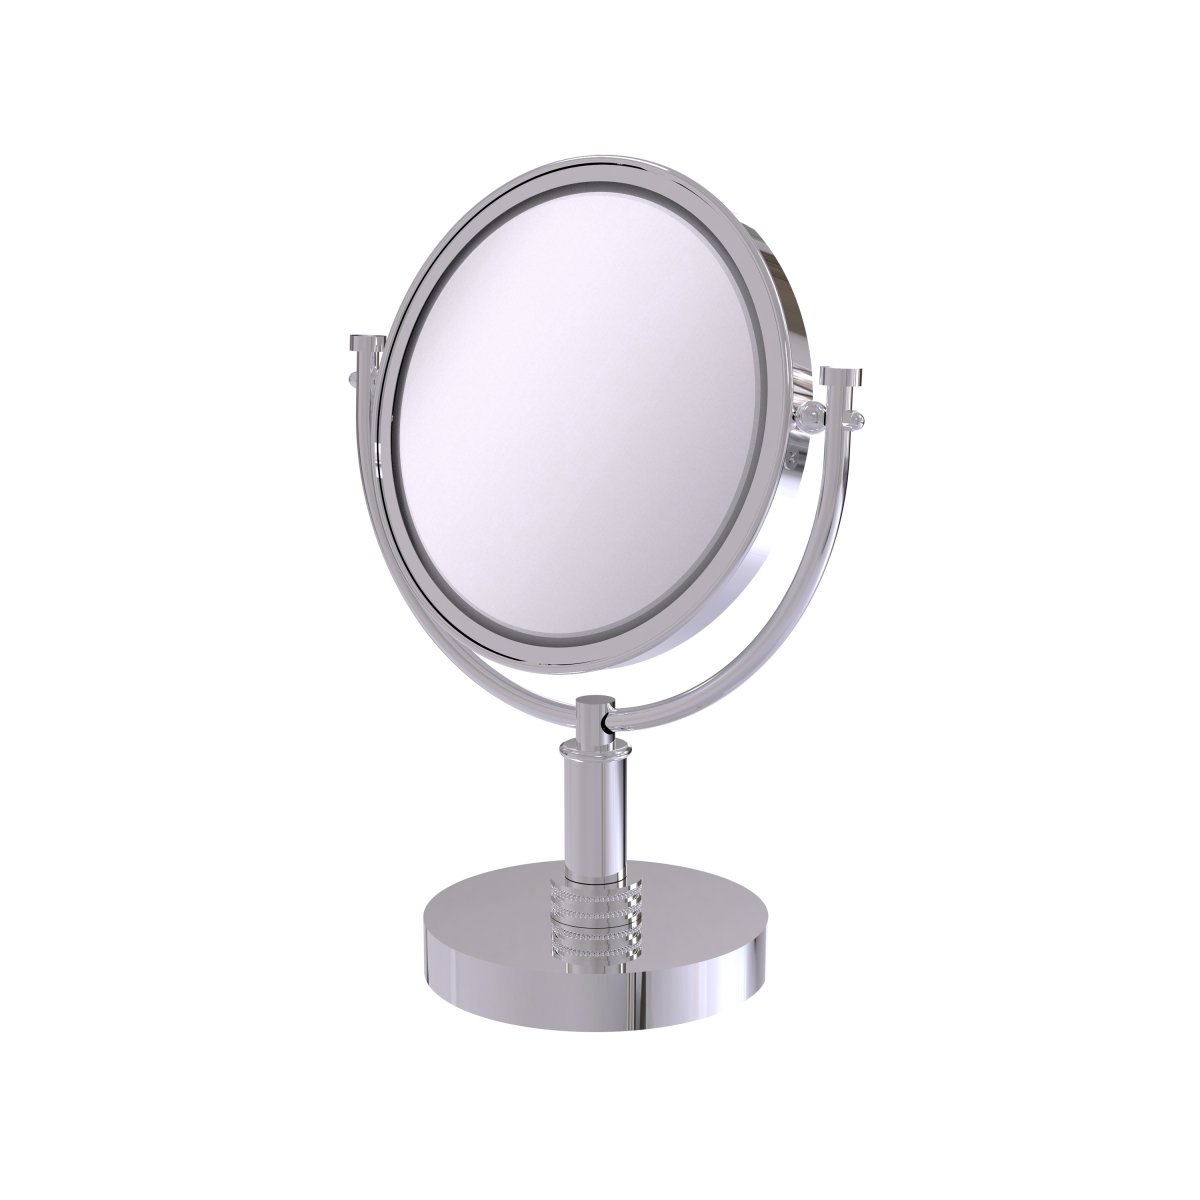 Picture of Allied Brass DM-4D-5X-PC 8 in. Vanity Top Make-Up Mirror 5X Magnification, Polished Chrome - 15 x 8 x 8 in.